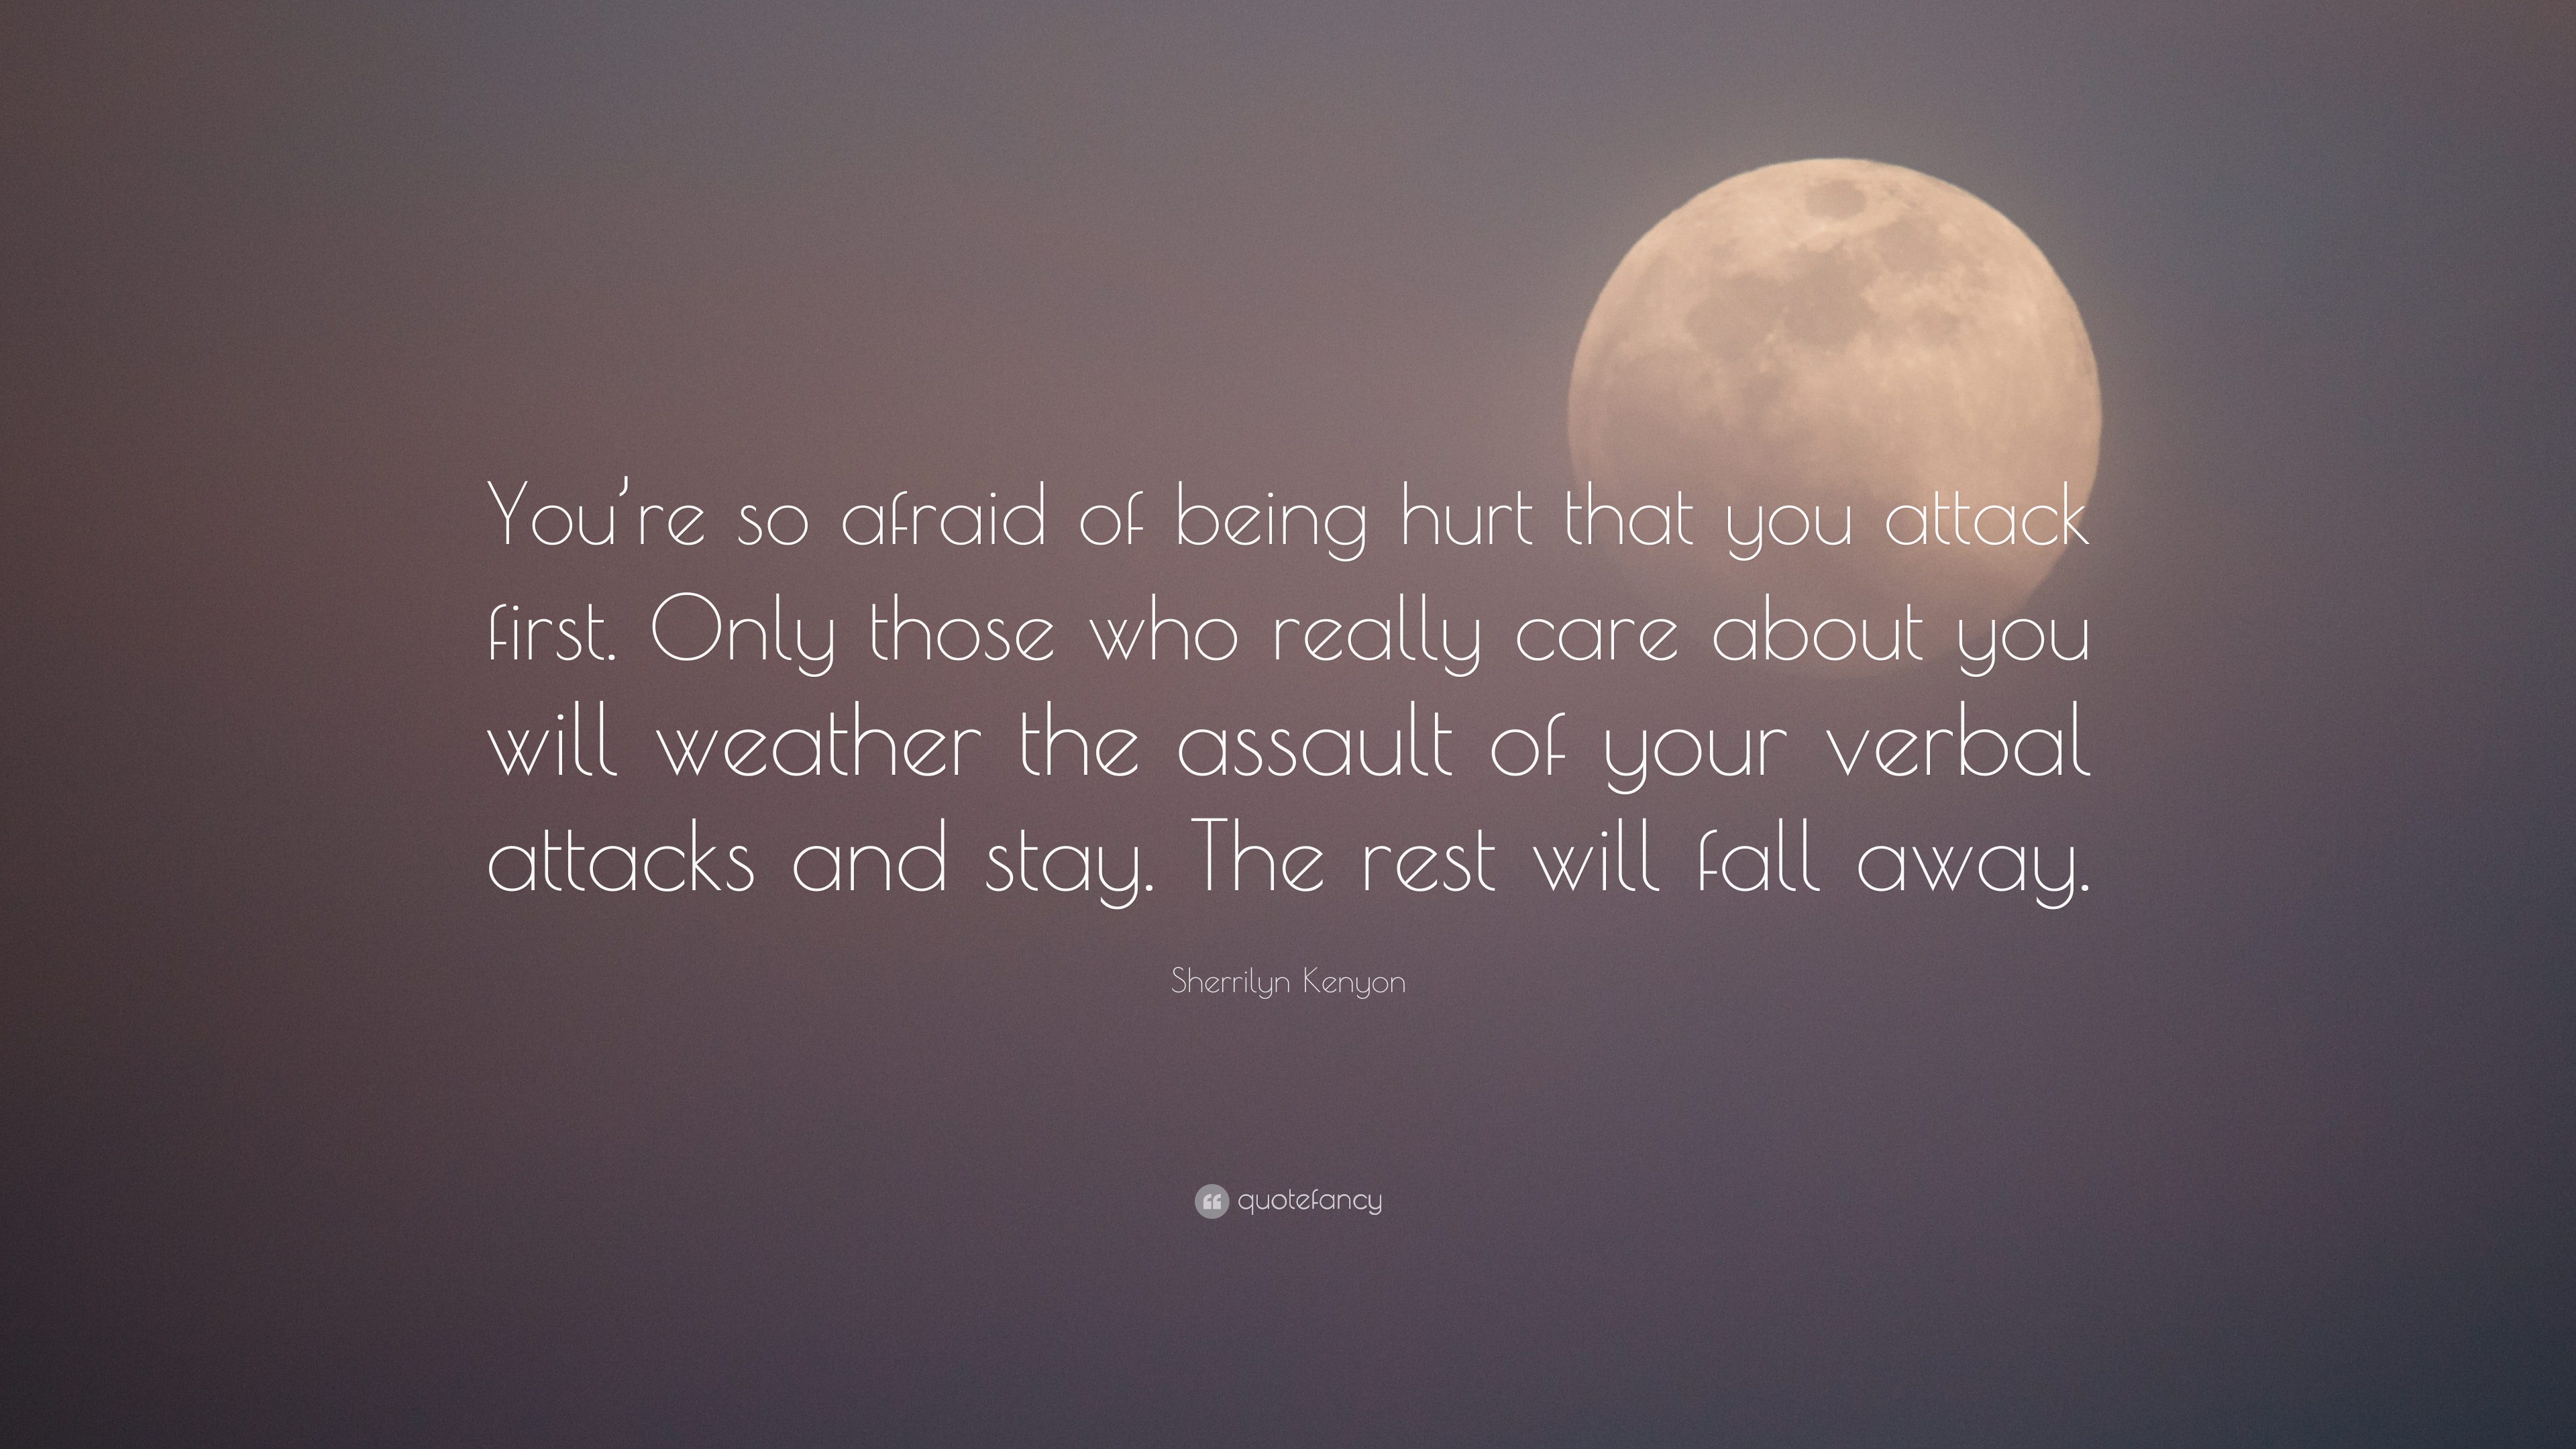 Sherrilyn Kenyon Quote: “You're So Afraid Of Being Hurt That You Attack First. Only Those Who Really Care About You Will Weather The Assault Of Y...”